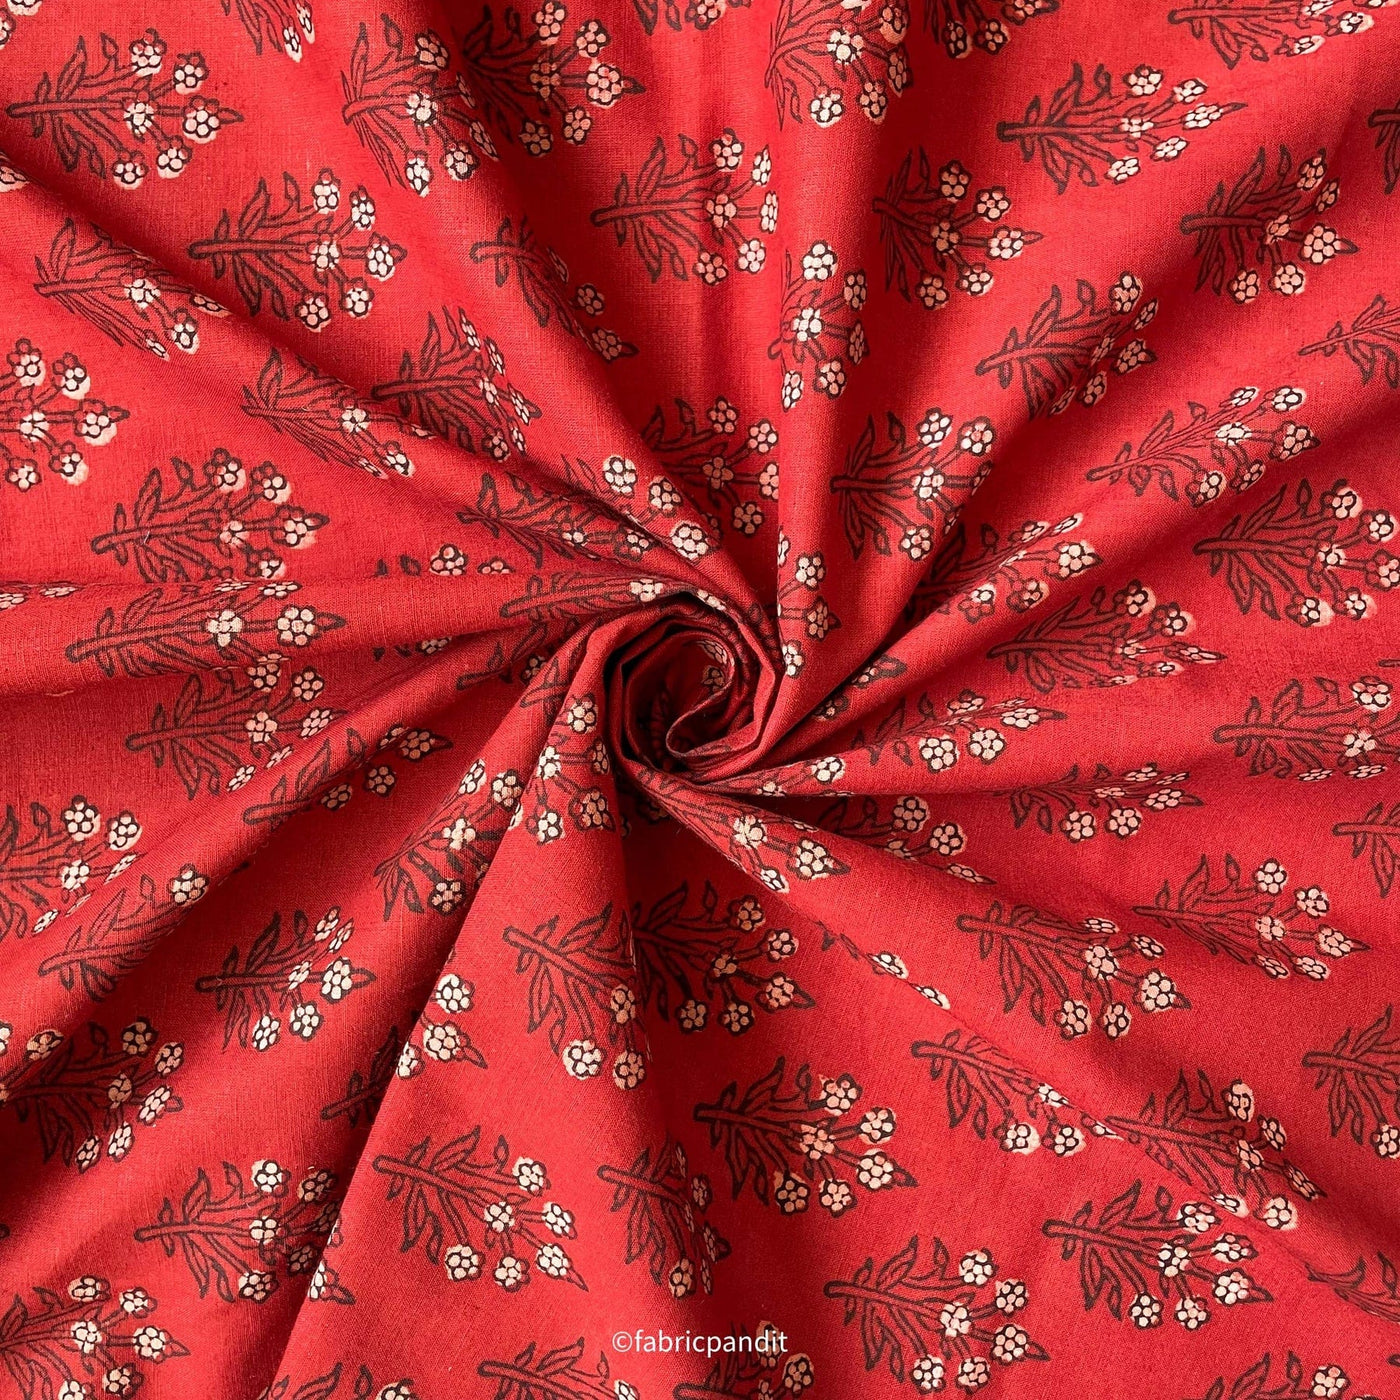 Fabric Pandit Fabric Dusty Red & Beige Daisy Flower Bunch Hand Block Printed Pure Cotton Fabric (Width 42 inches)